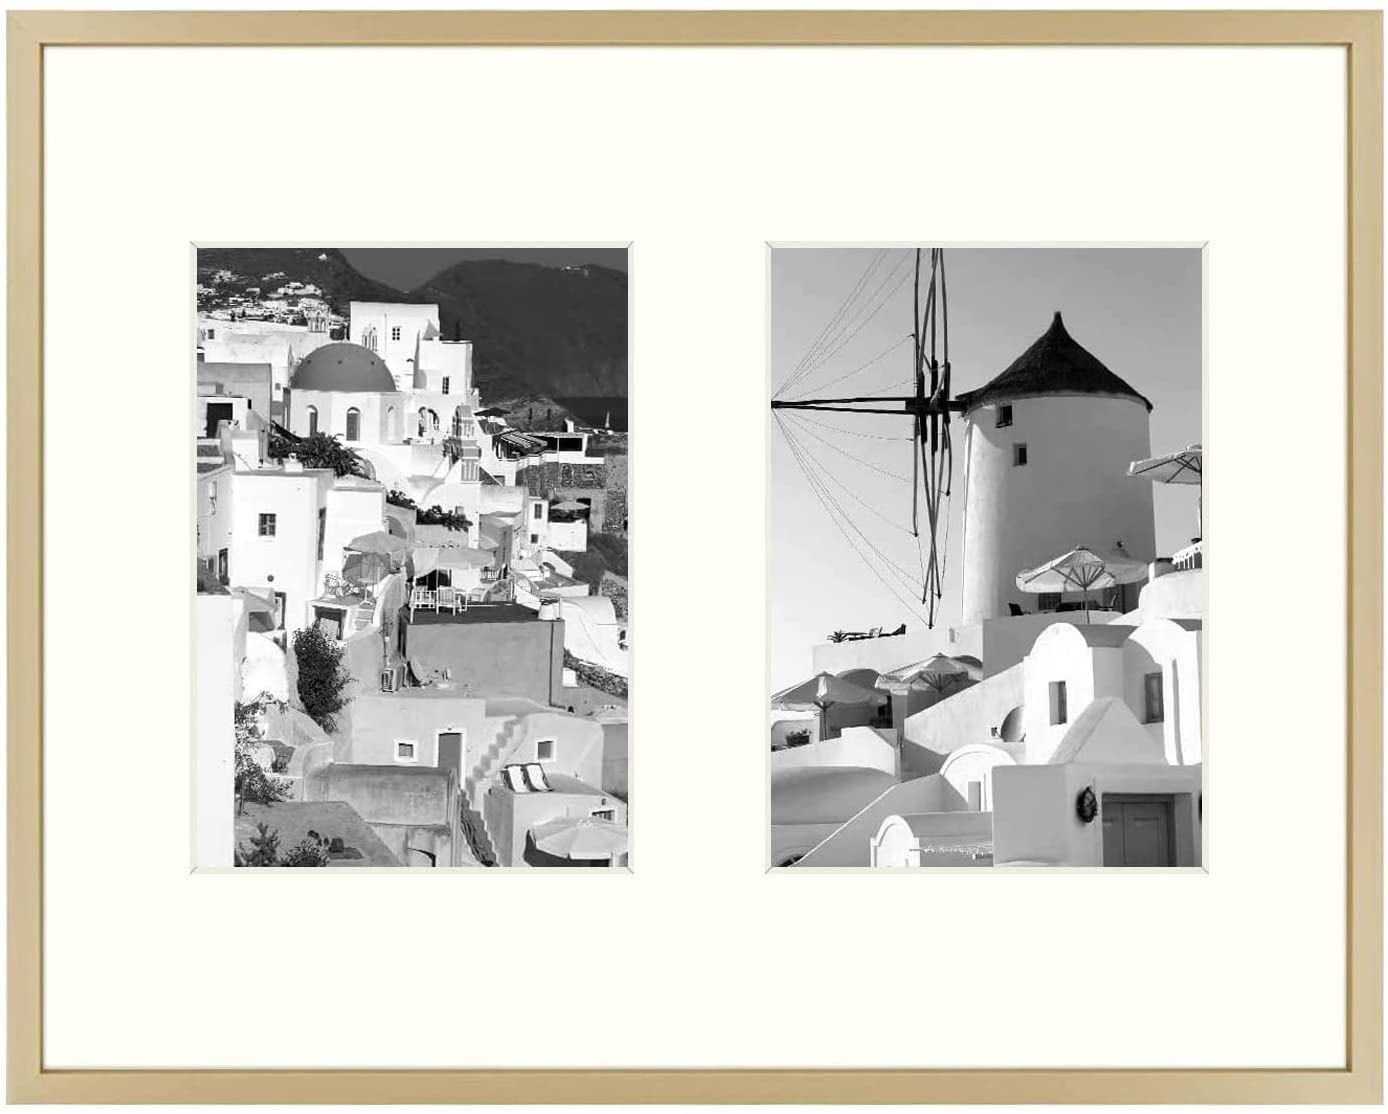 Golden State Art, 11x14 Black Photo Wood Collage Frame with Real Glass and White Mat displays (2) 5x7 Pictures